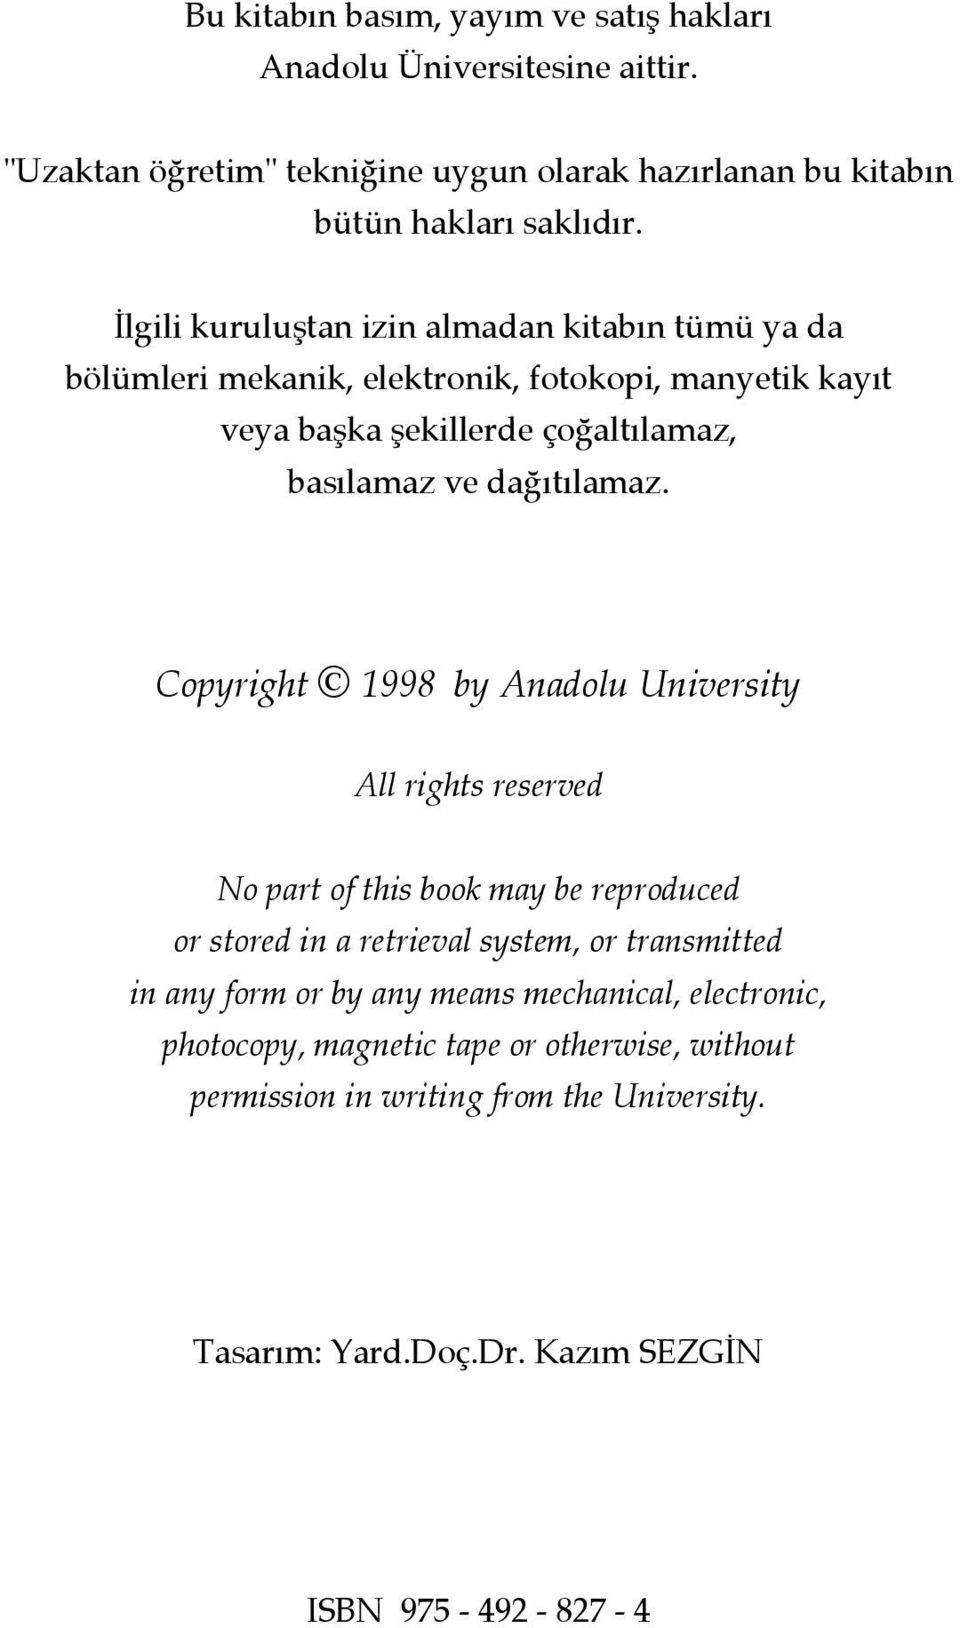 Copyright 1998 by Anadolu University All rights reserved No part of this book may be reproduced or stored in a retrieval system, or transmitted in any form or by any